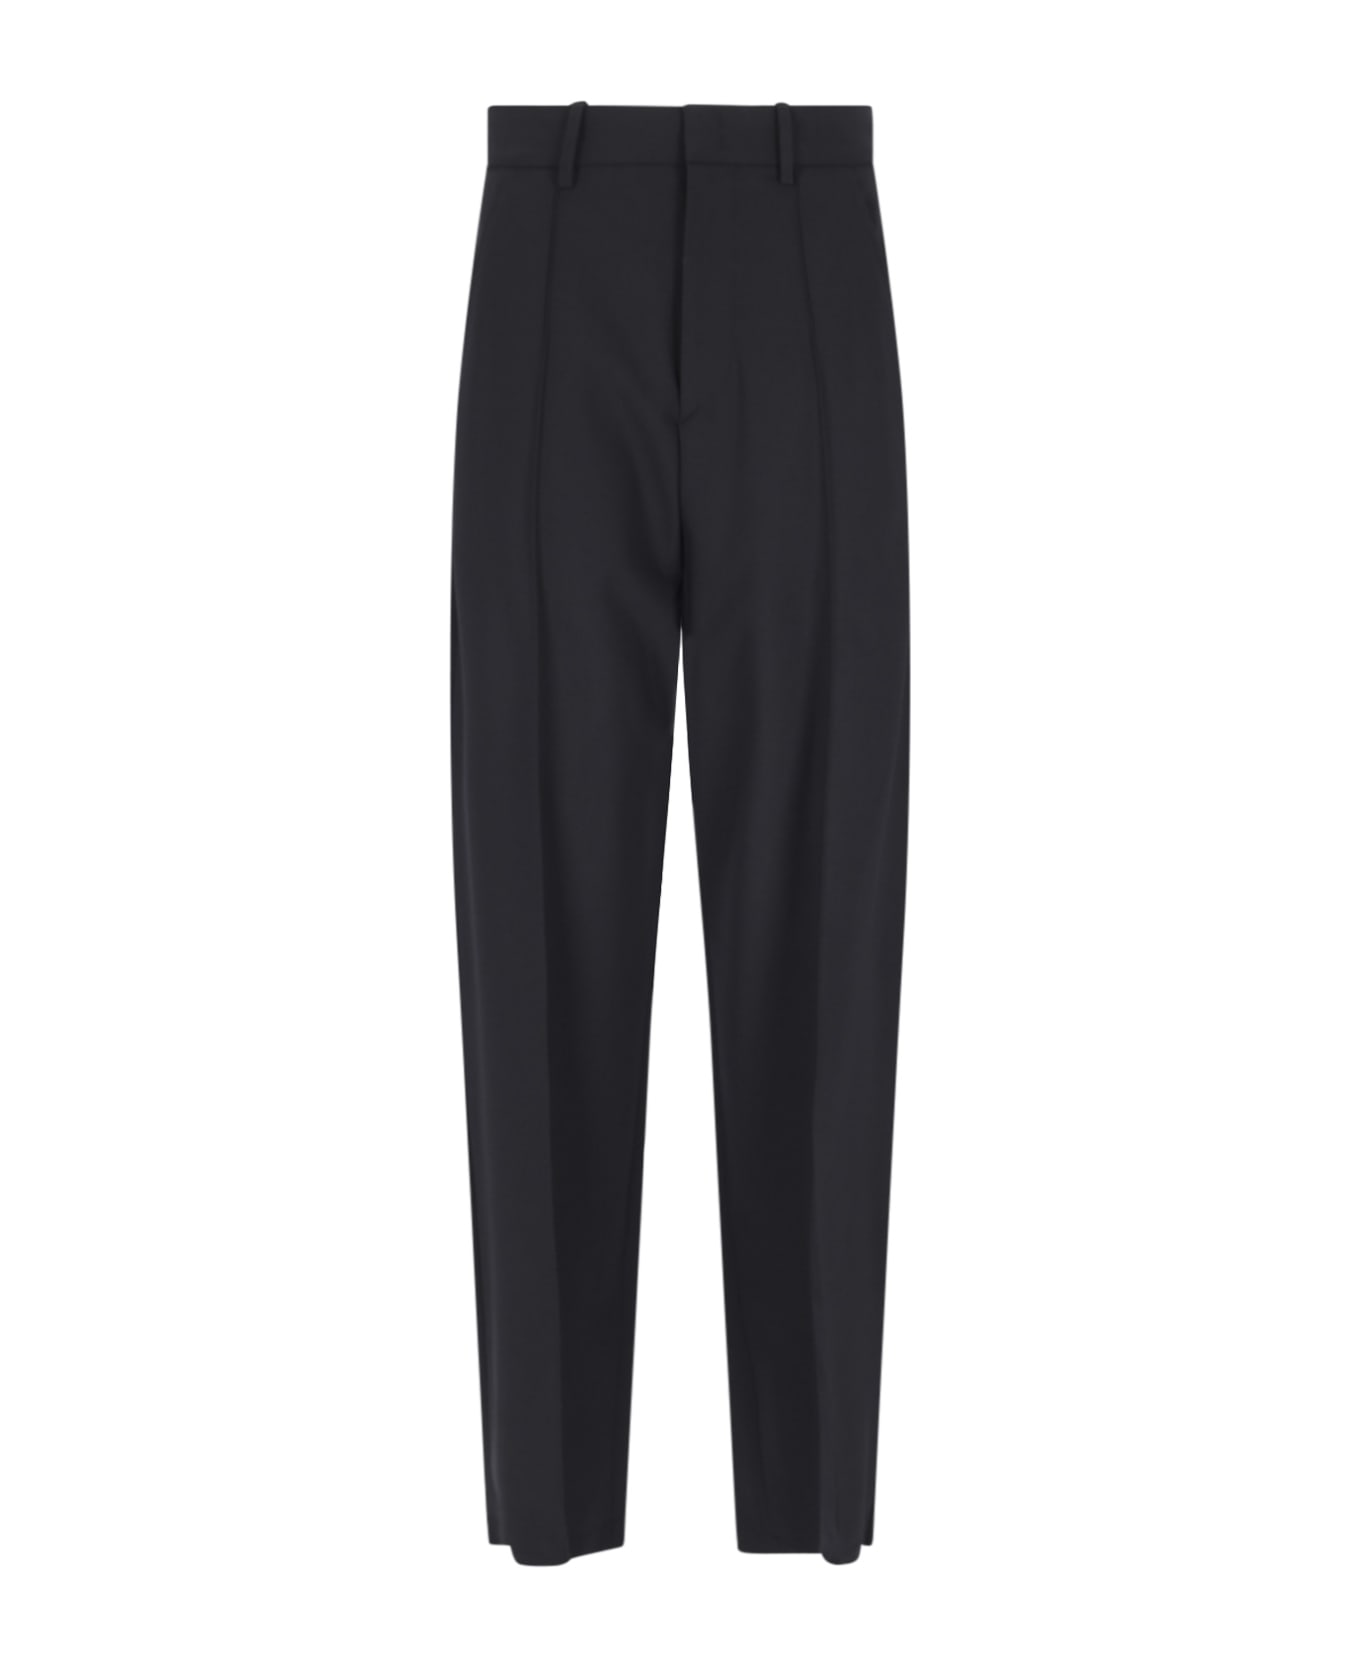 Isabel Marant Tailored Trousers - Black  